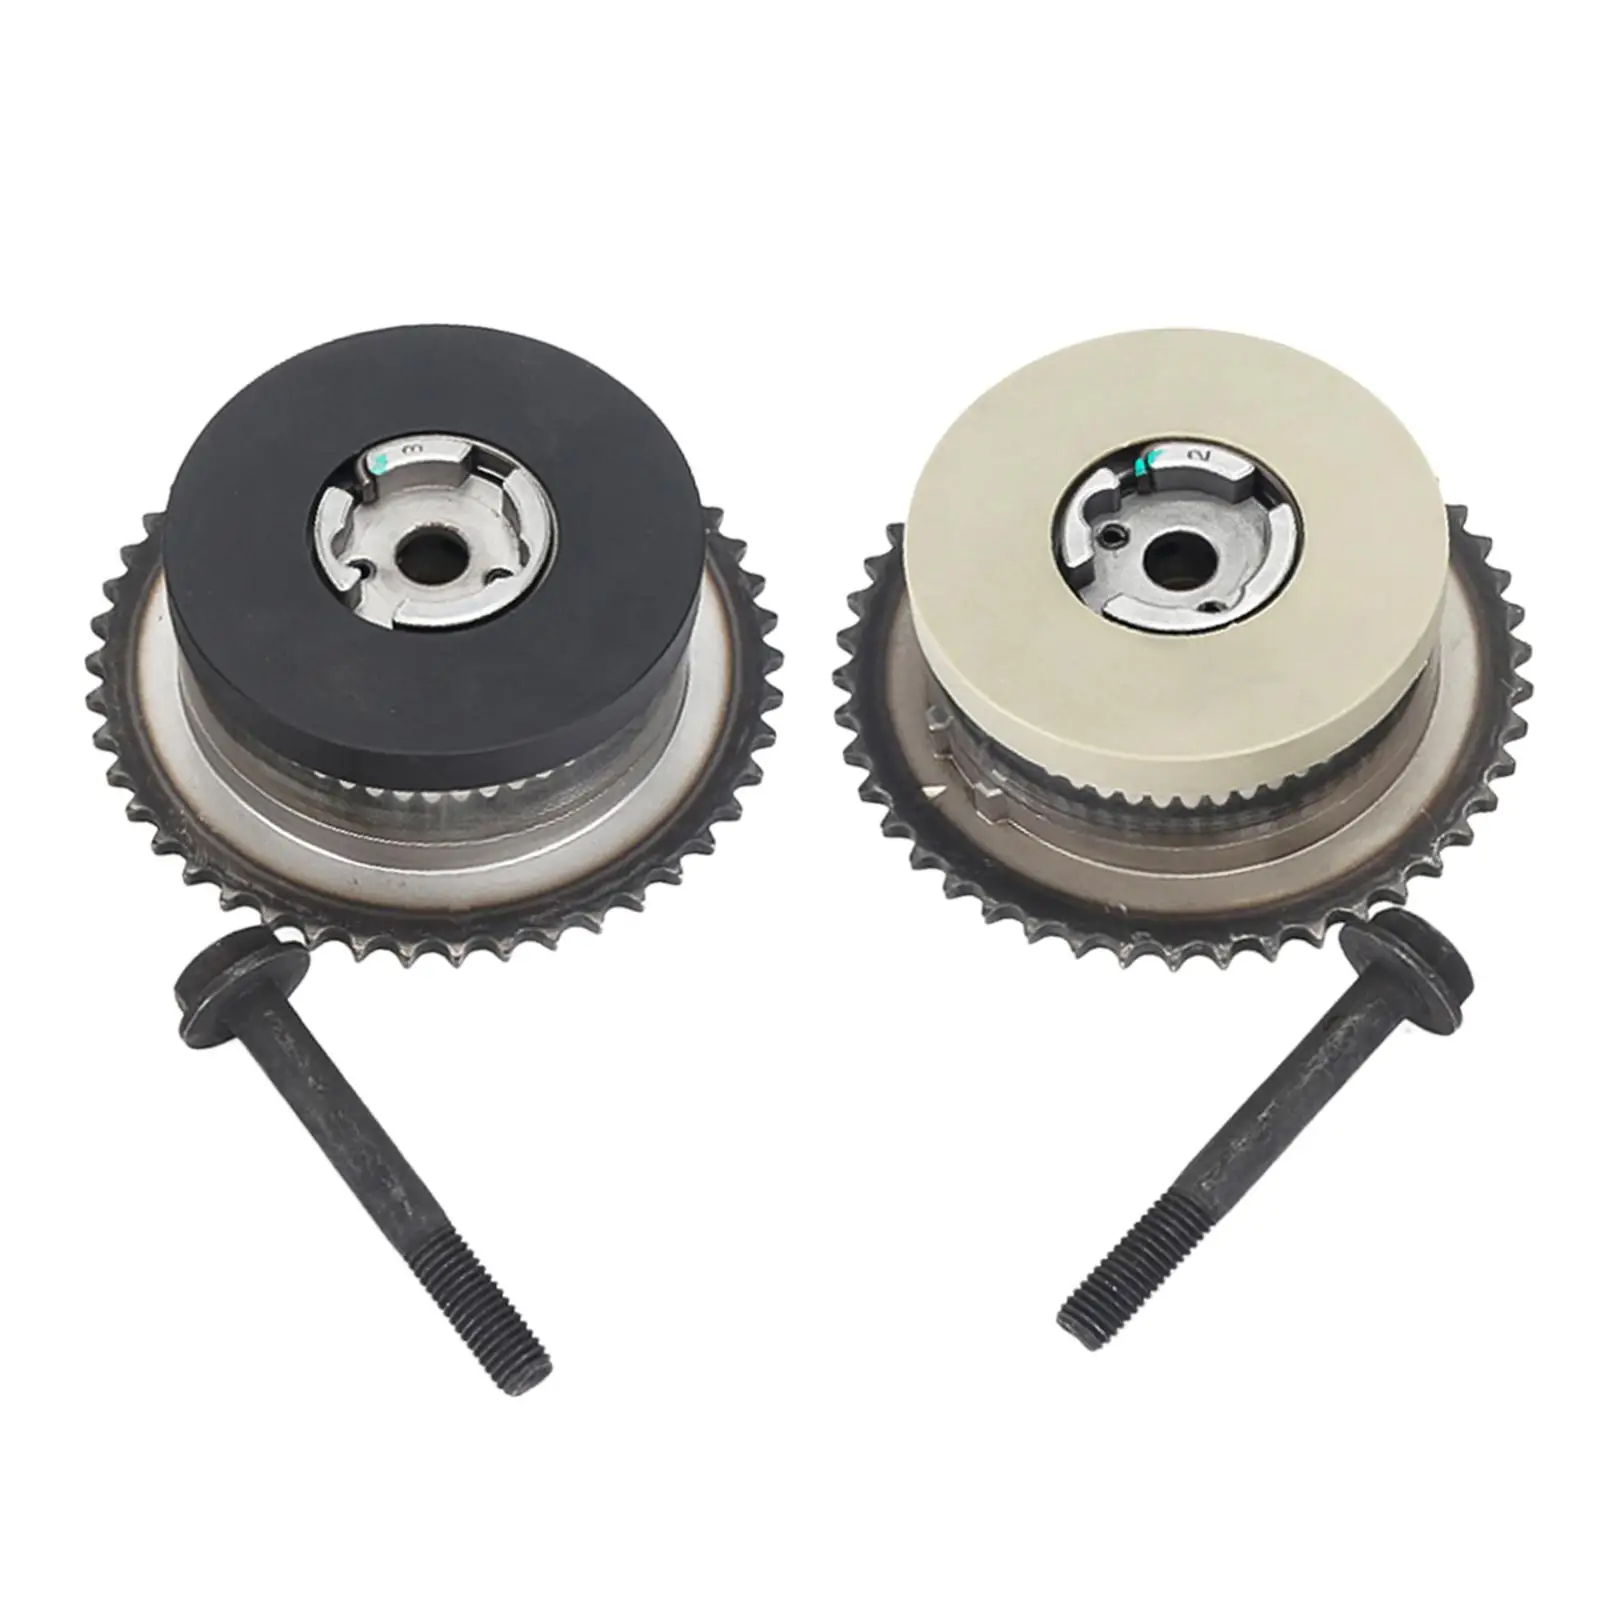 Pair Timing Chain Cam Camshaft Phaser Gear for Lnf Ldk Lhu 2.0L Replaces